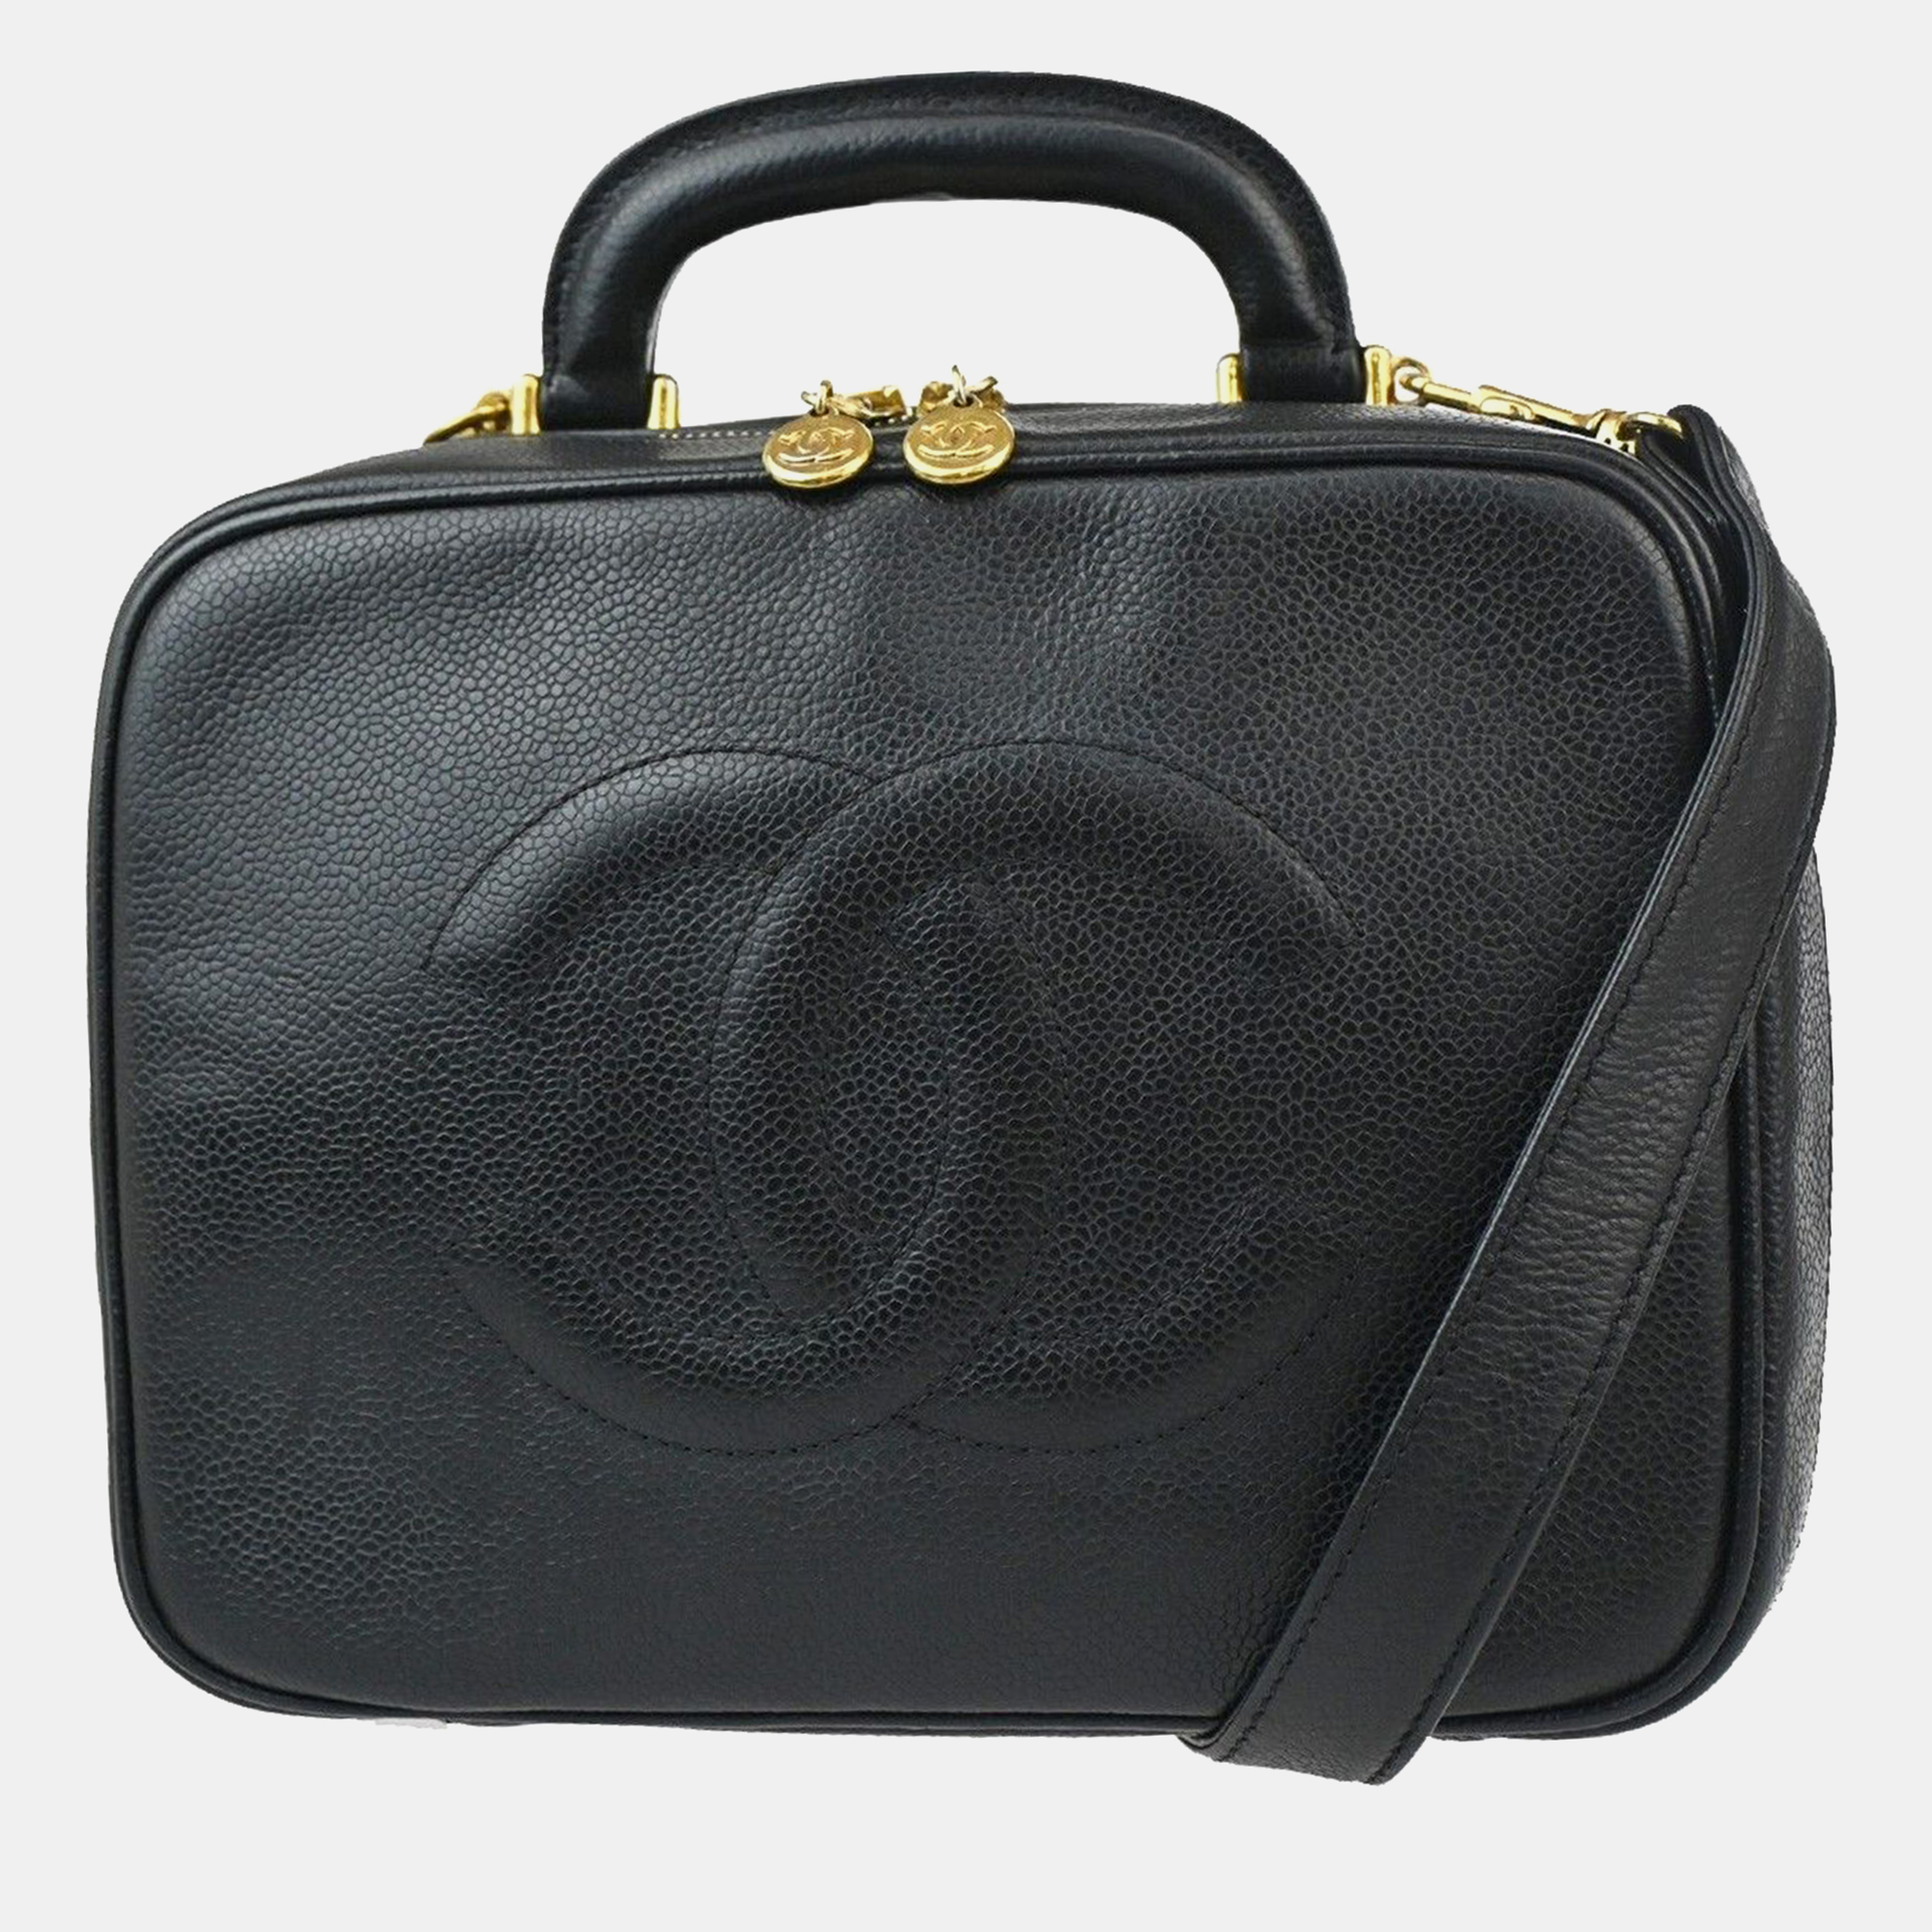 Chanel black caviar timeless cc vanity case clutches